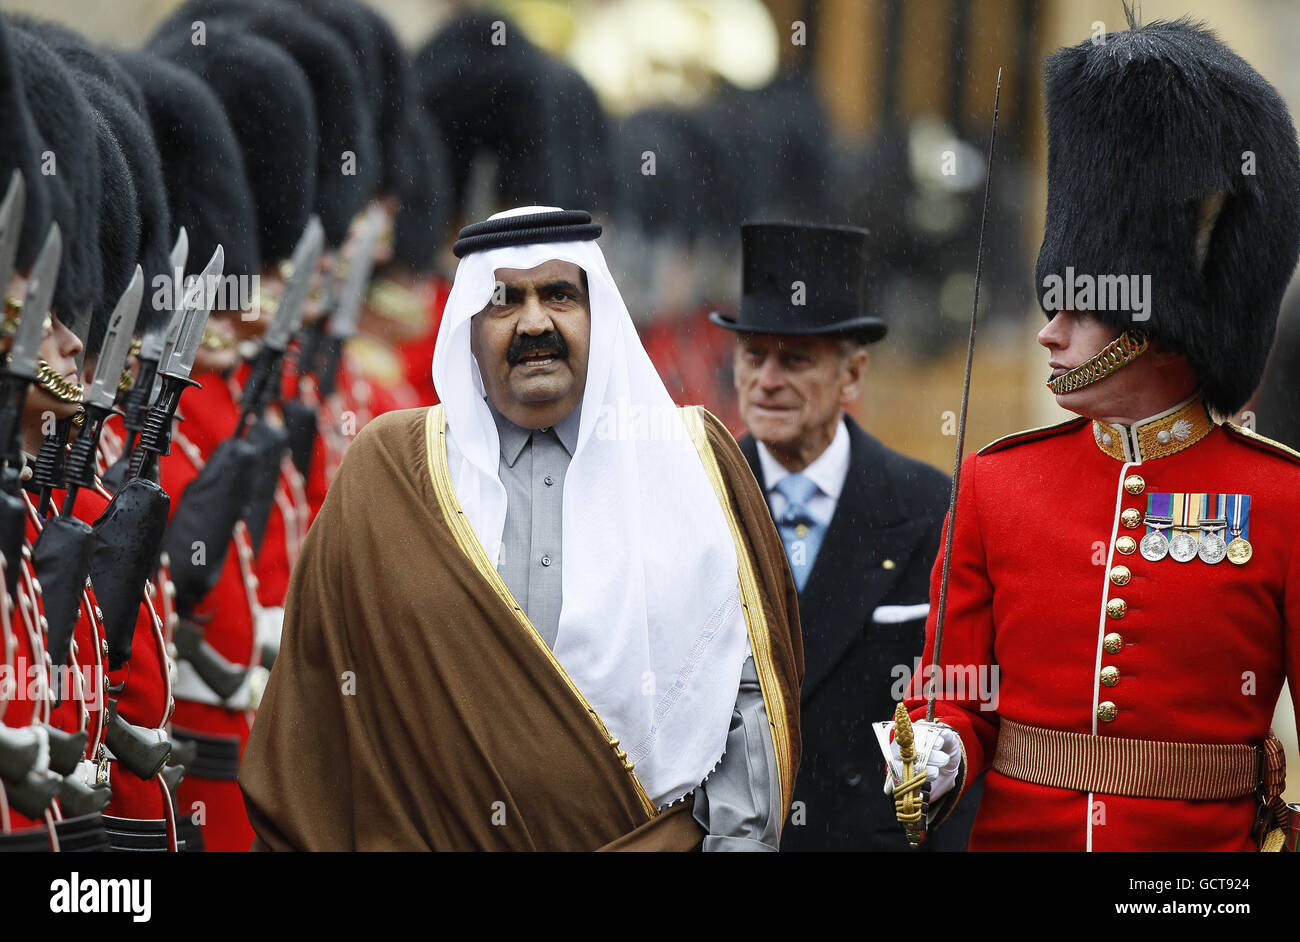 The Emir of Qatar Sheik Hamad bin Khalifa Al-Thani, inspects the guard of honour in the grounds at Windsor Castle Stock Photo